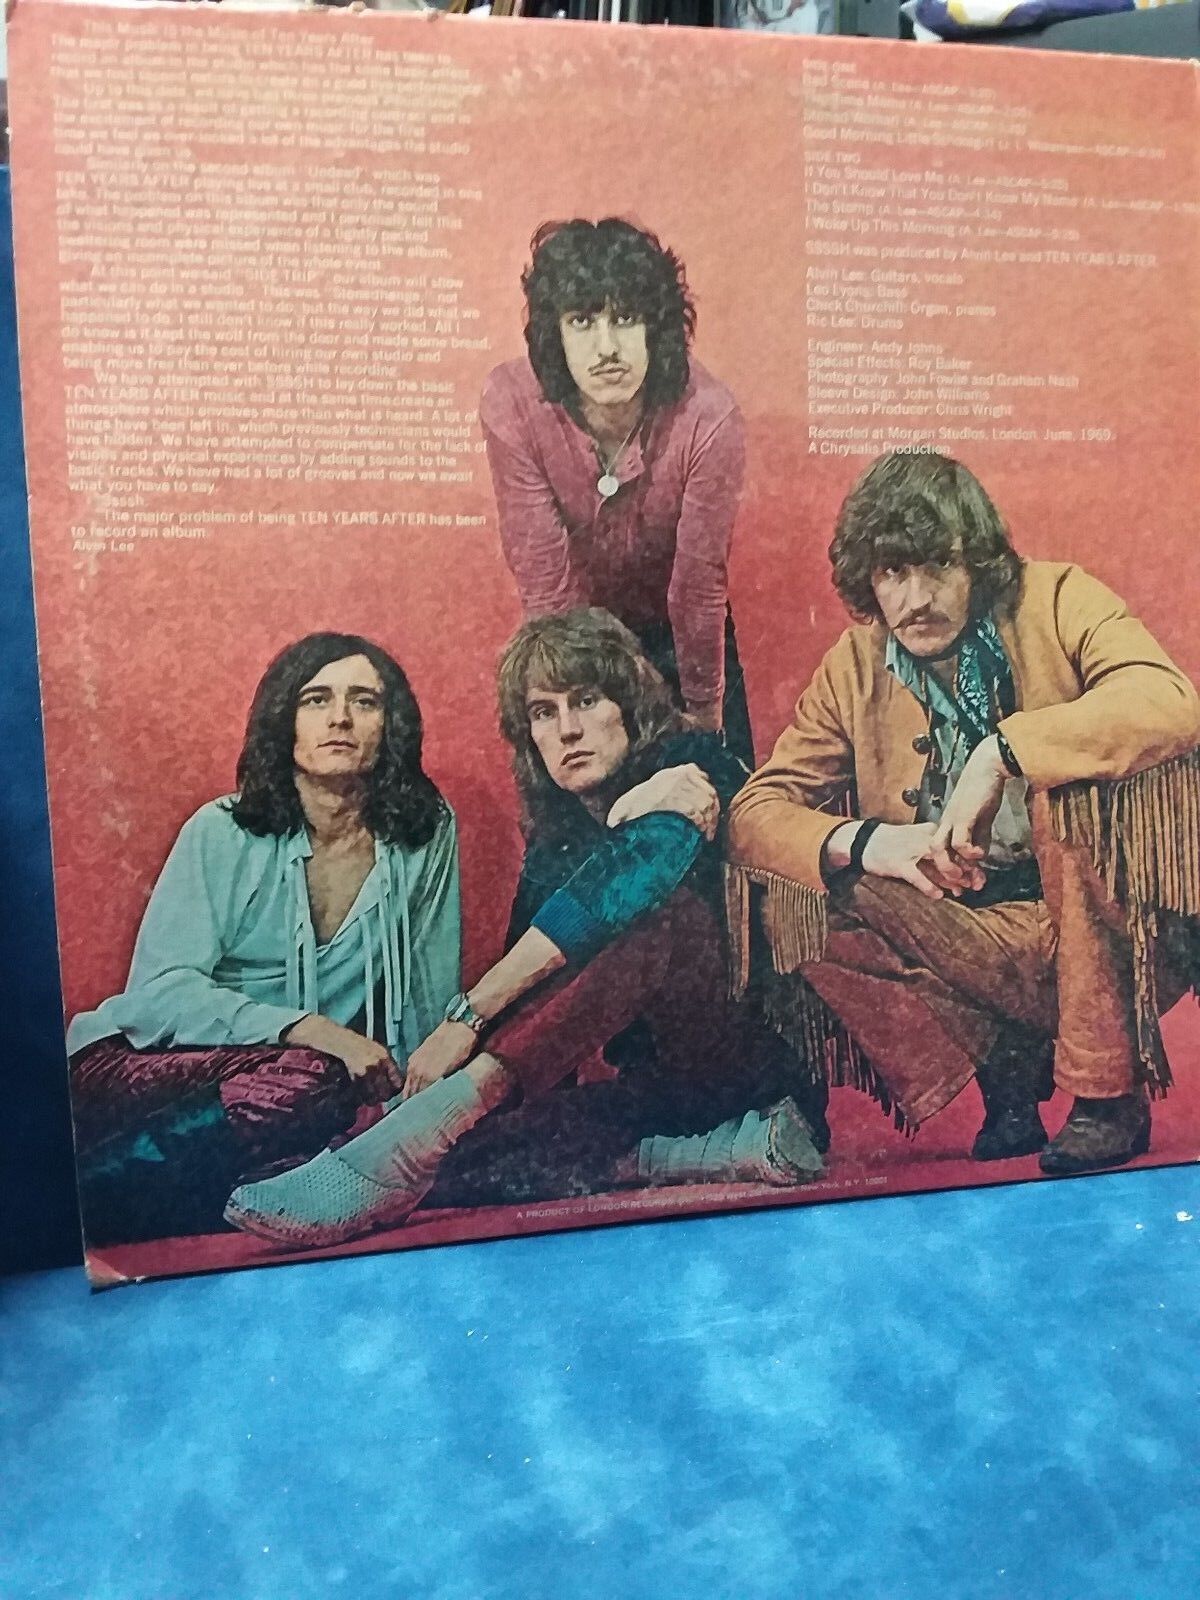 TEN YEARS AFTER - Ssssh LP 1st US Issue on DERAM USED